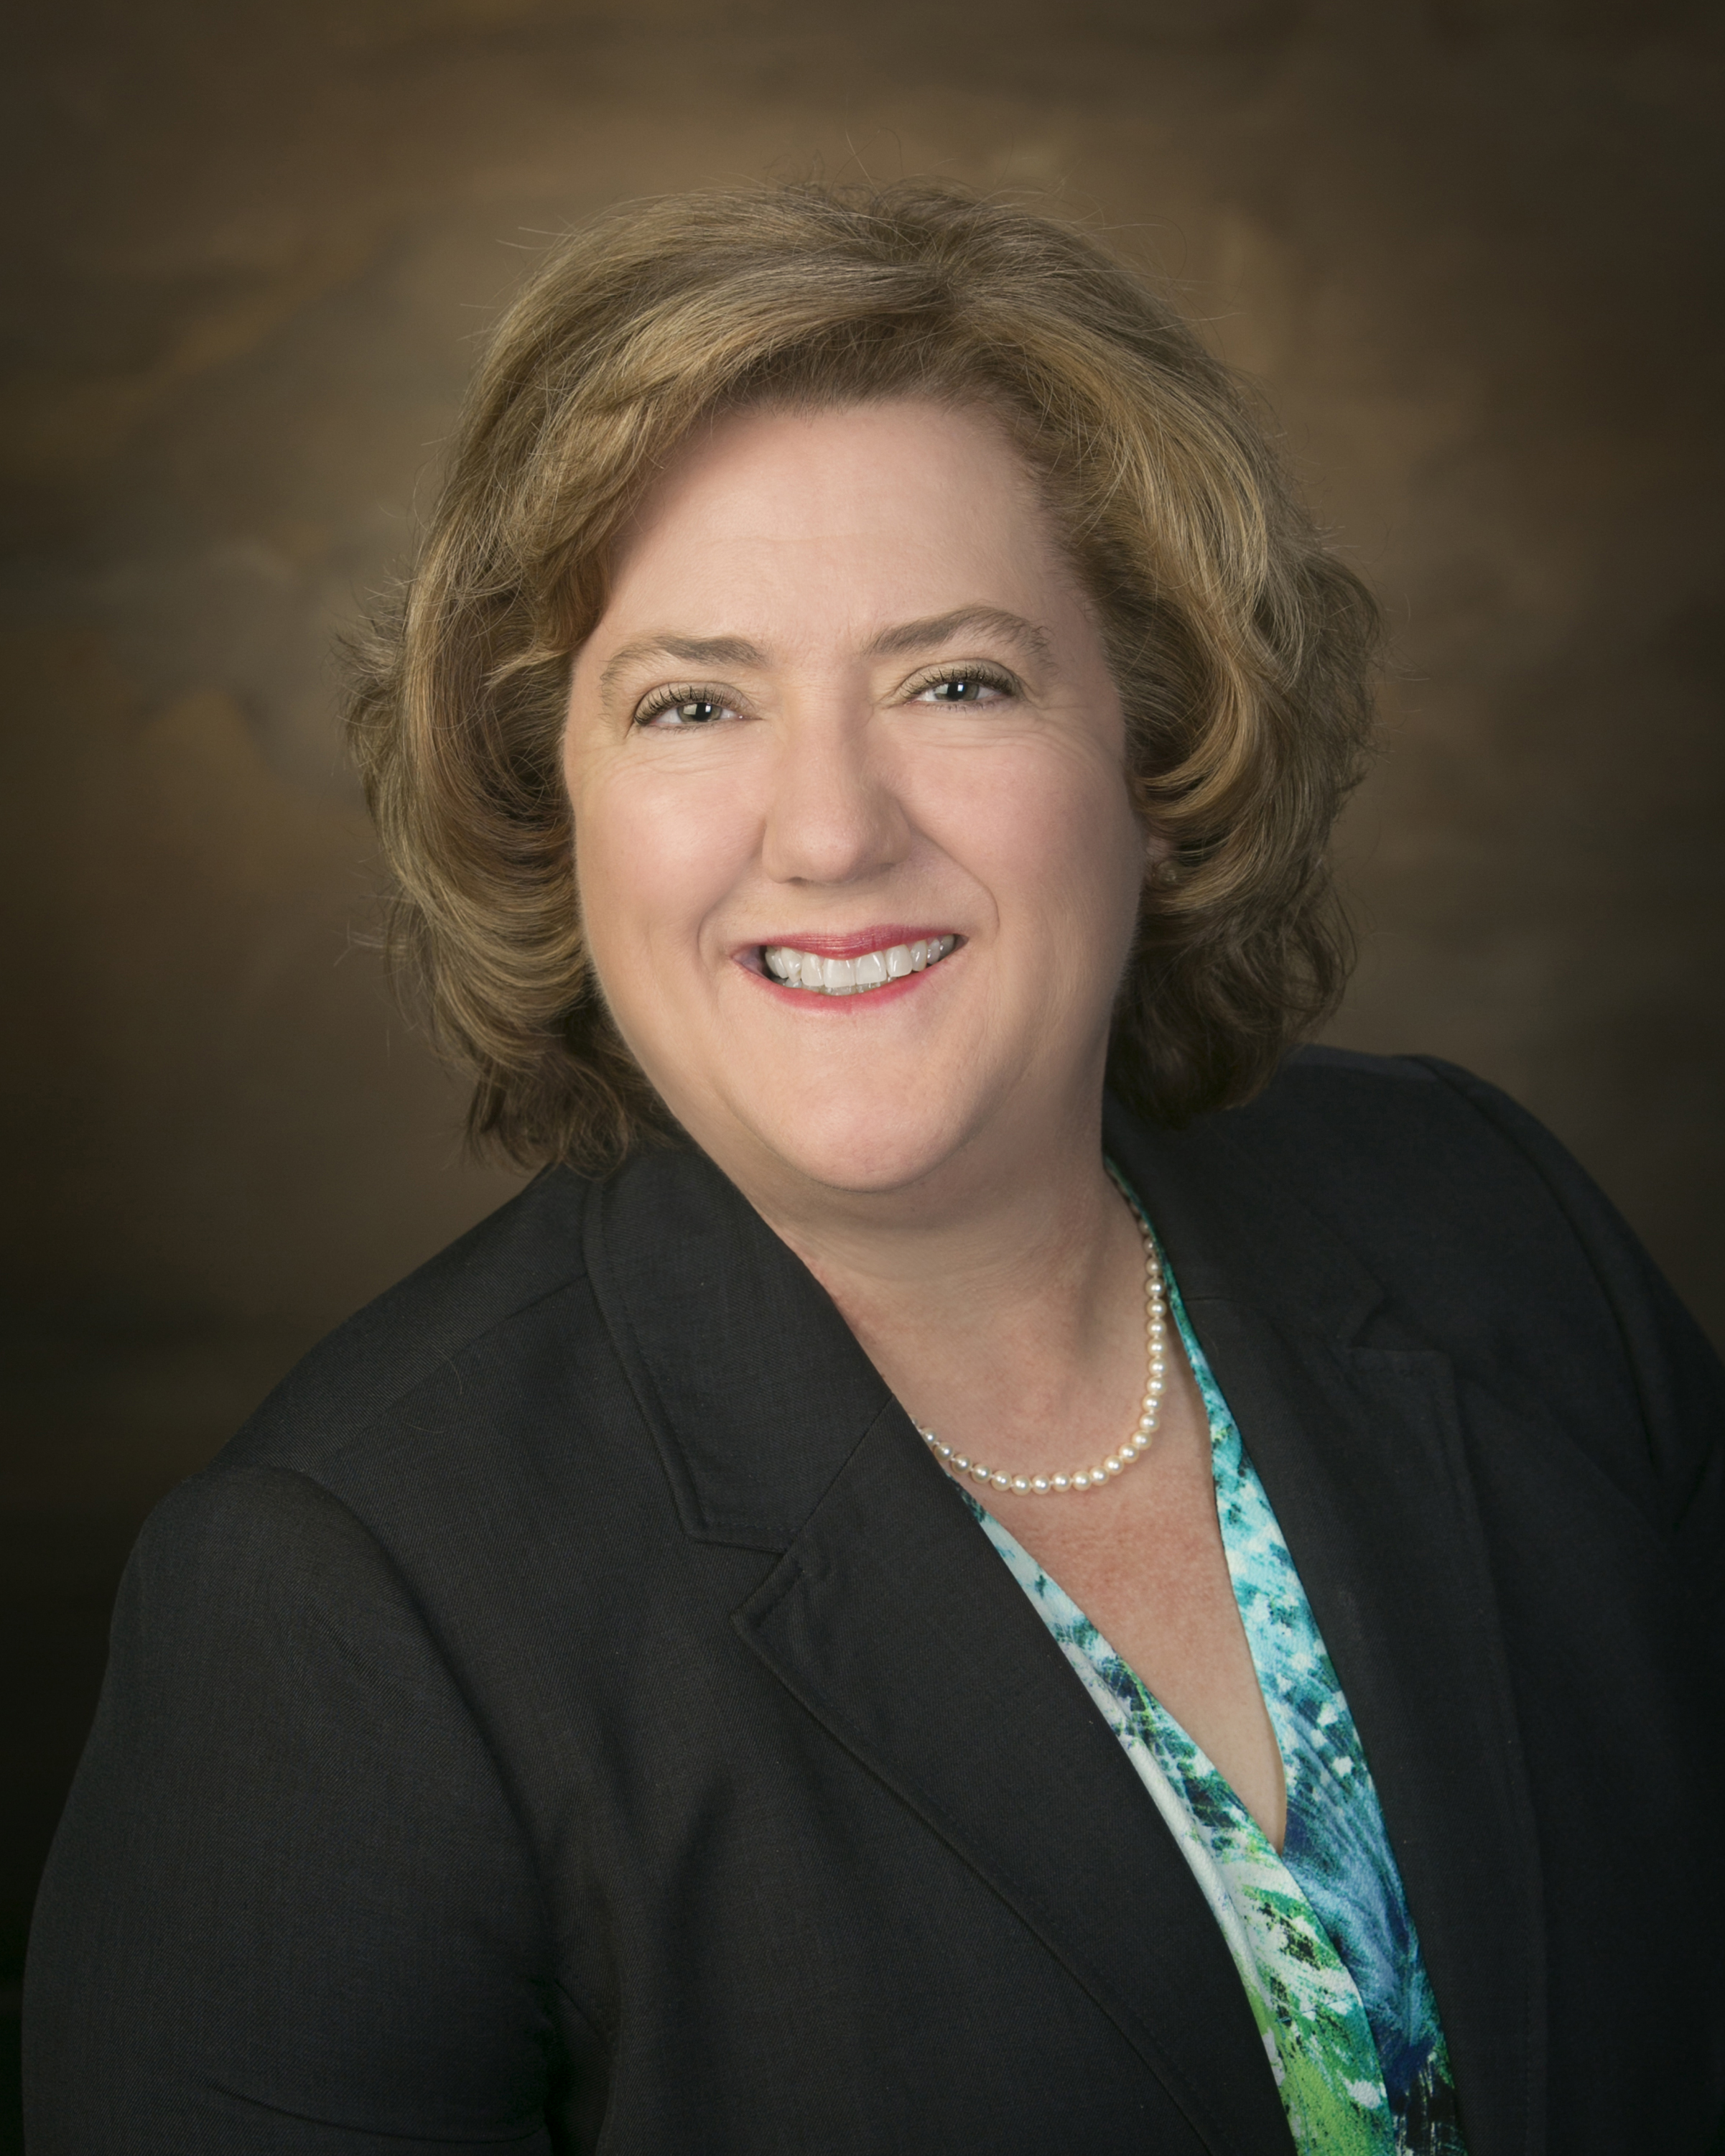 Tennessee's Jennifer Houston Brings a Woman's Perspective to the Table as NCBA's Vice President